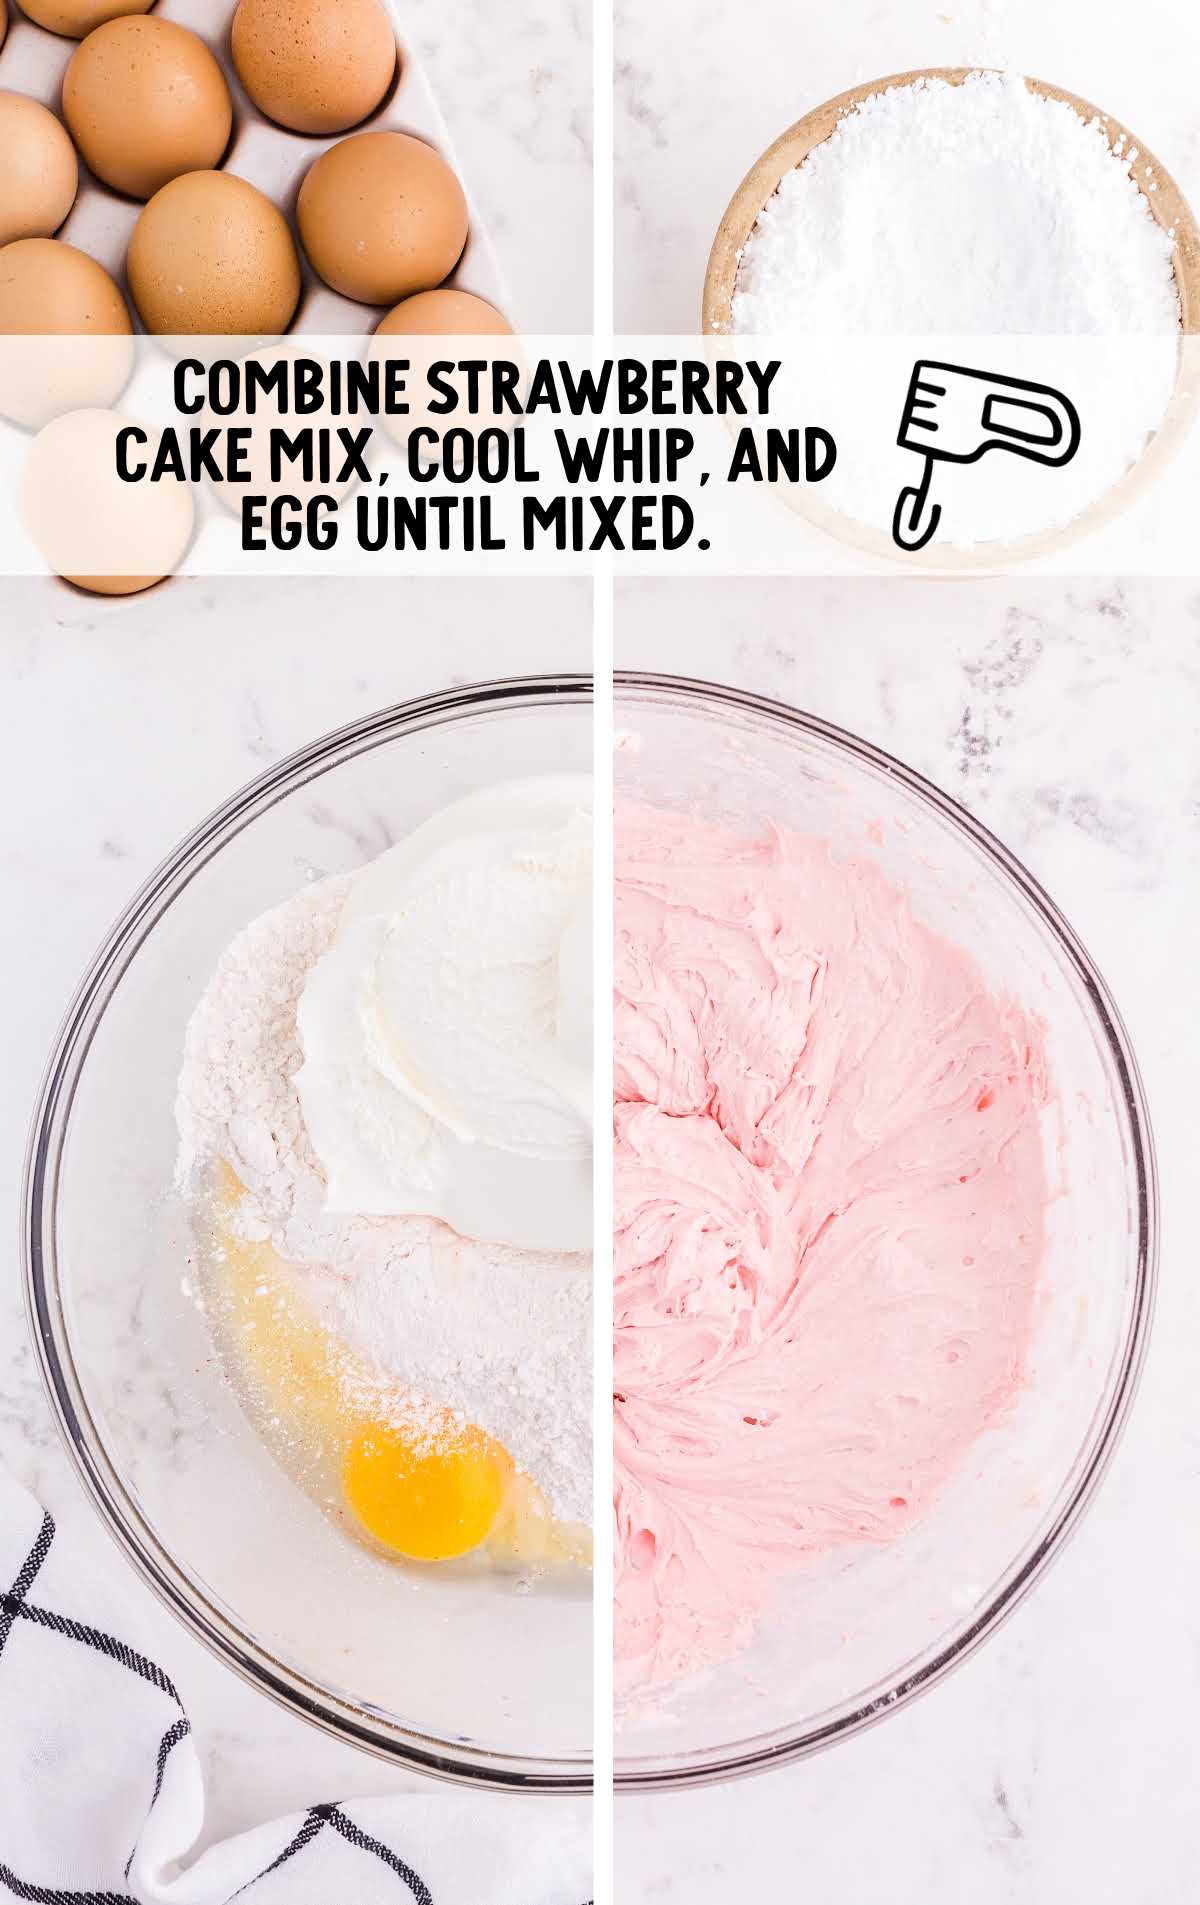 strawberry cake mix, cool whip, and egg combined